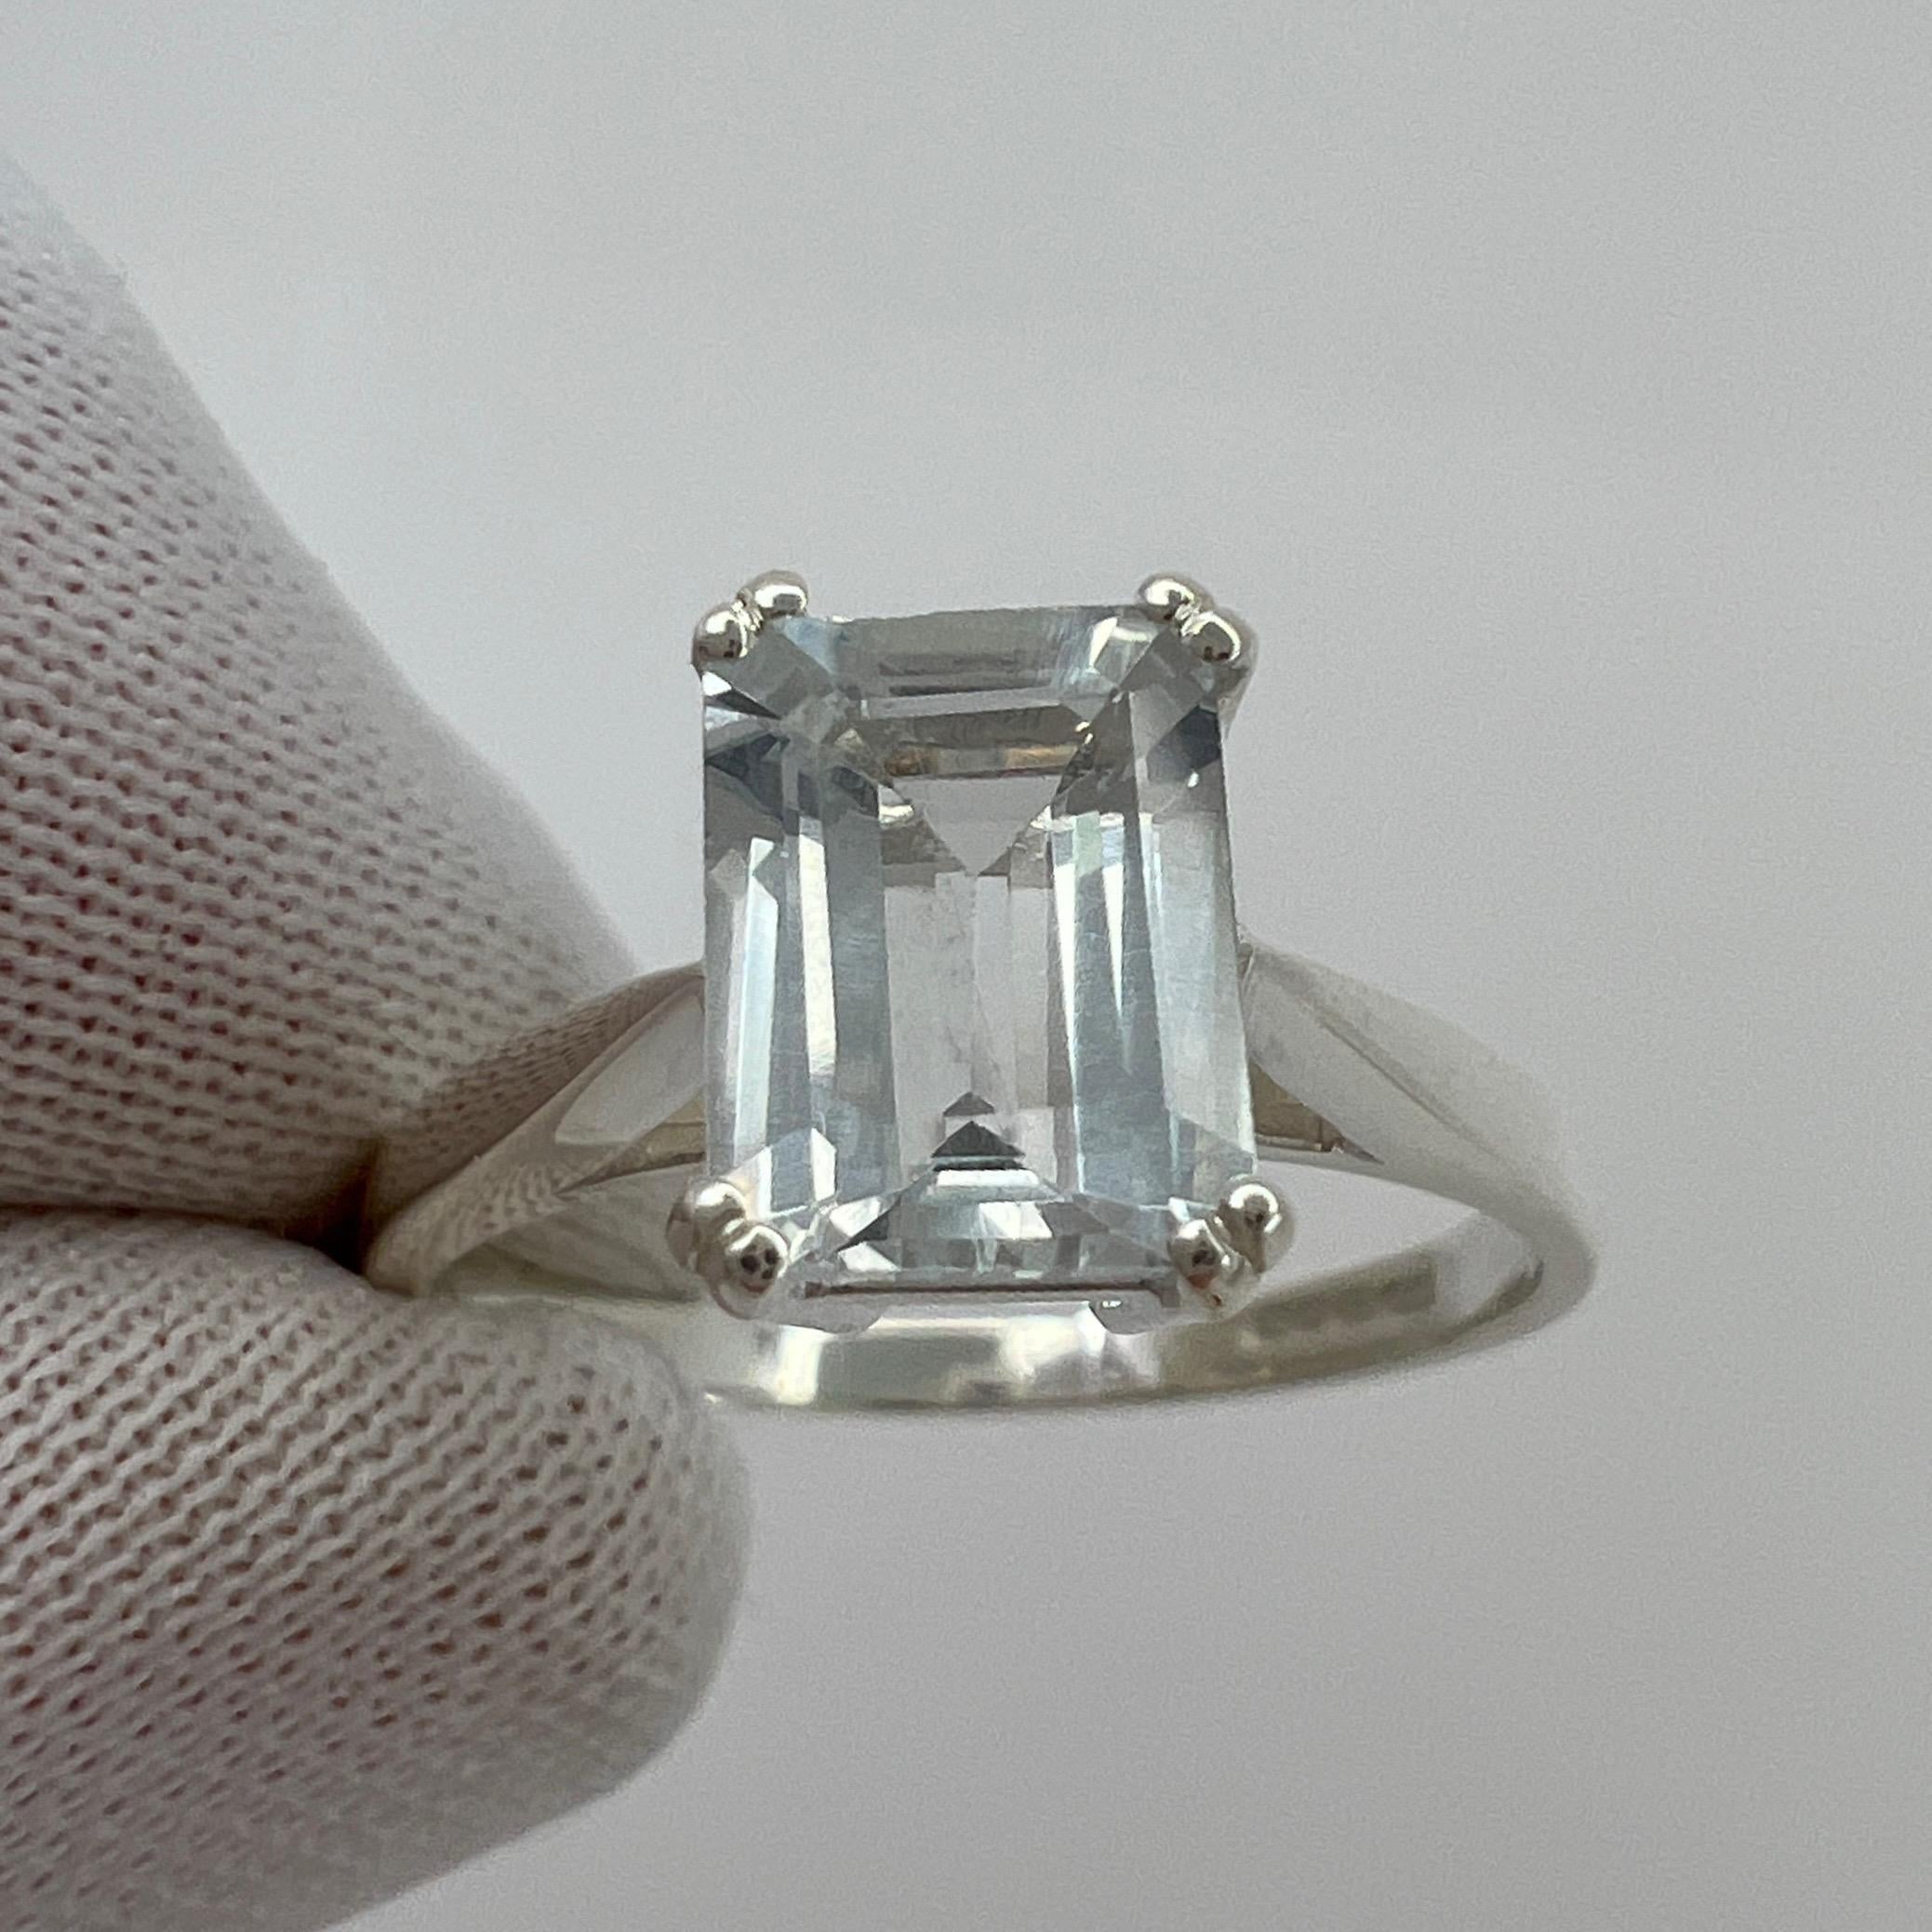 Light Blue Emerald Cut Aquamarine Solitaire Sterling Silver  Ring.

1.50 Carat aquamarine with a stunning bright blue colour and good clarity, some small natural inclusions visible (as shown in photos) but not a dirty stone. 

Also has an excellent